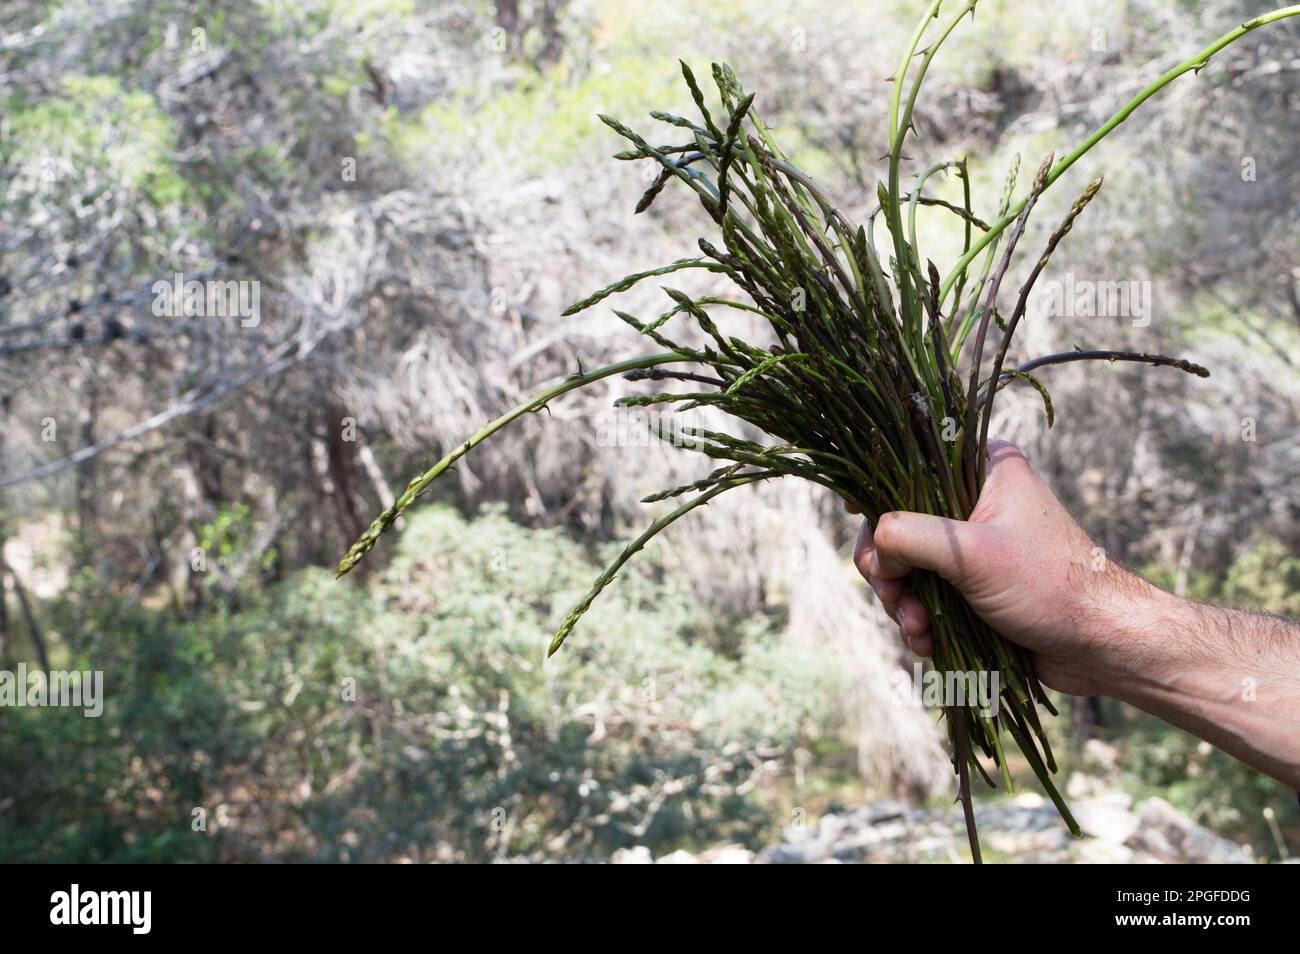 Bunch of wild asparagus in the hand, picked up in the forest during springtime in Dalmatia Stock Photo